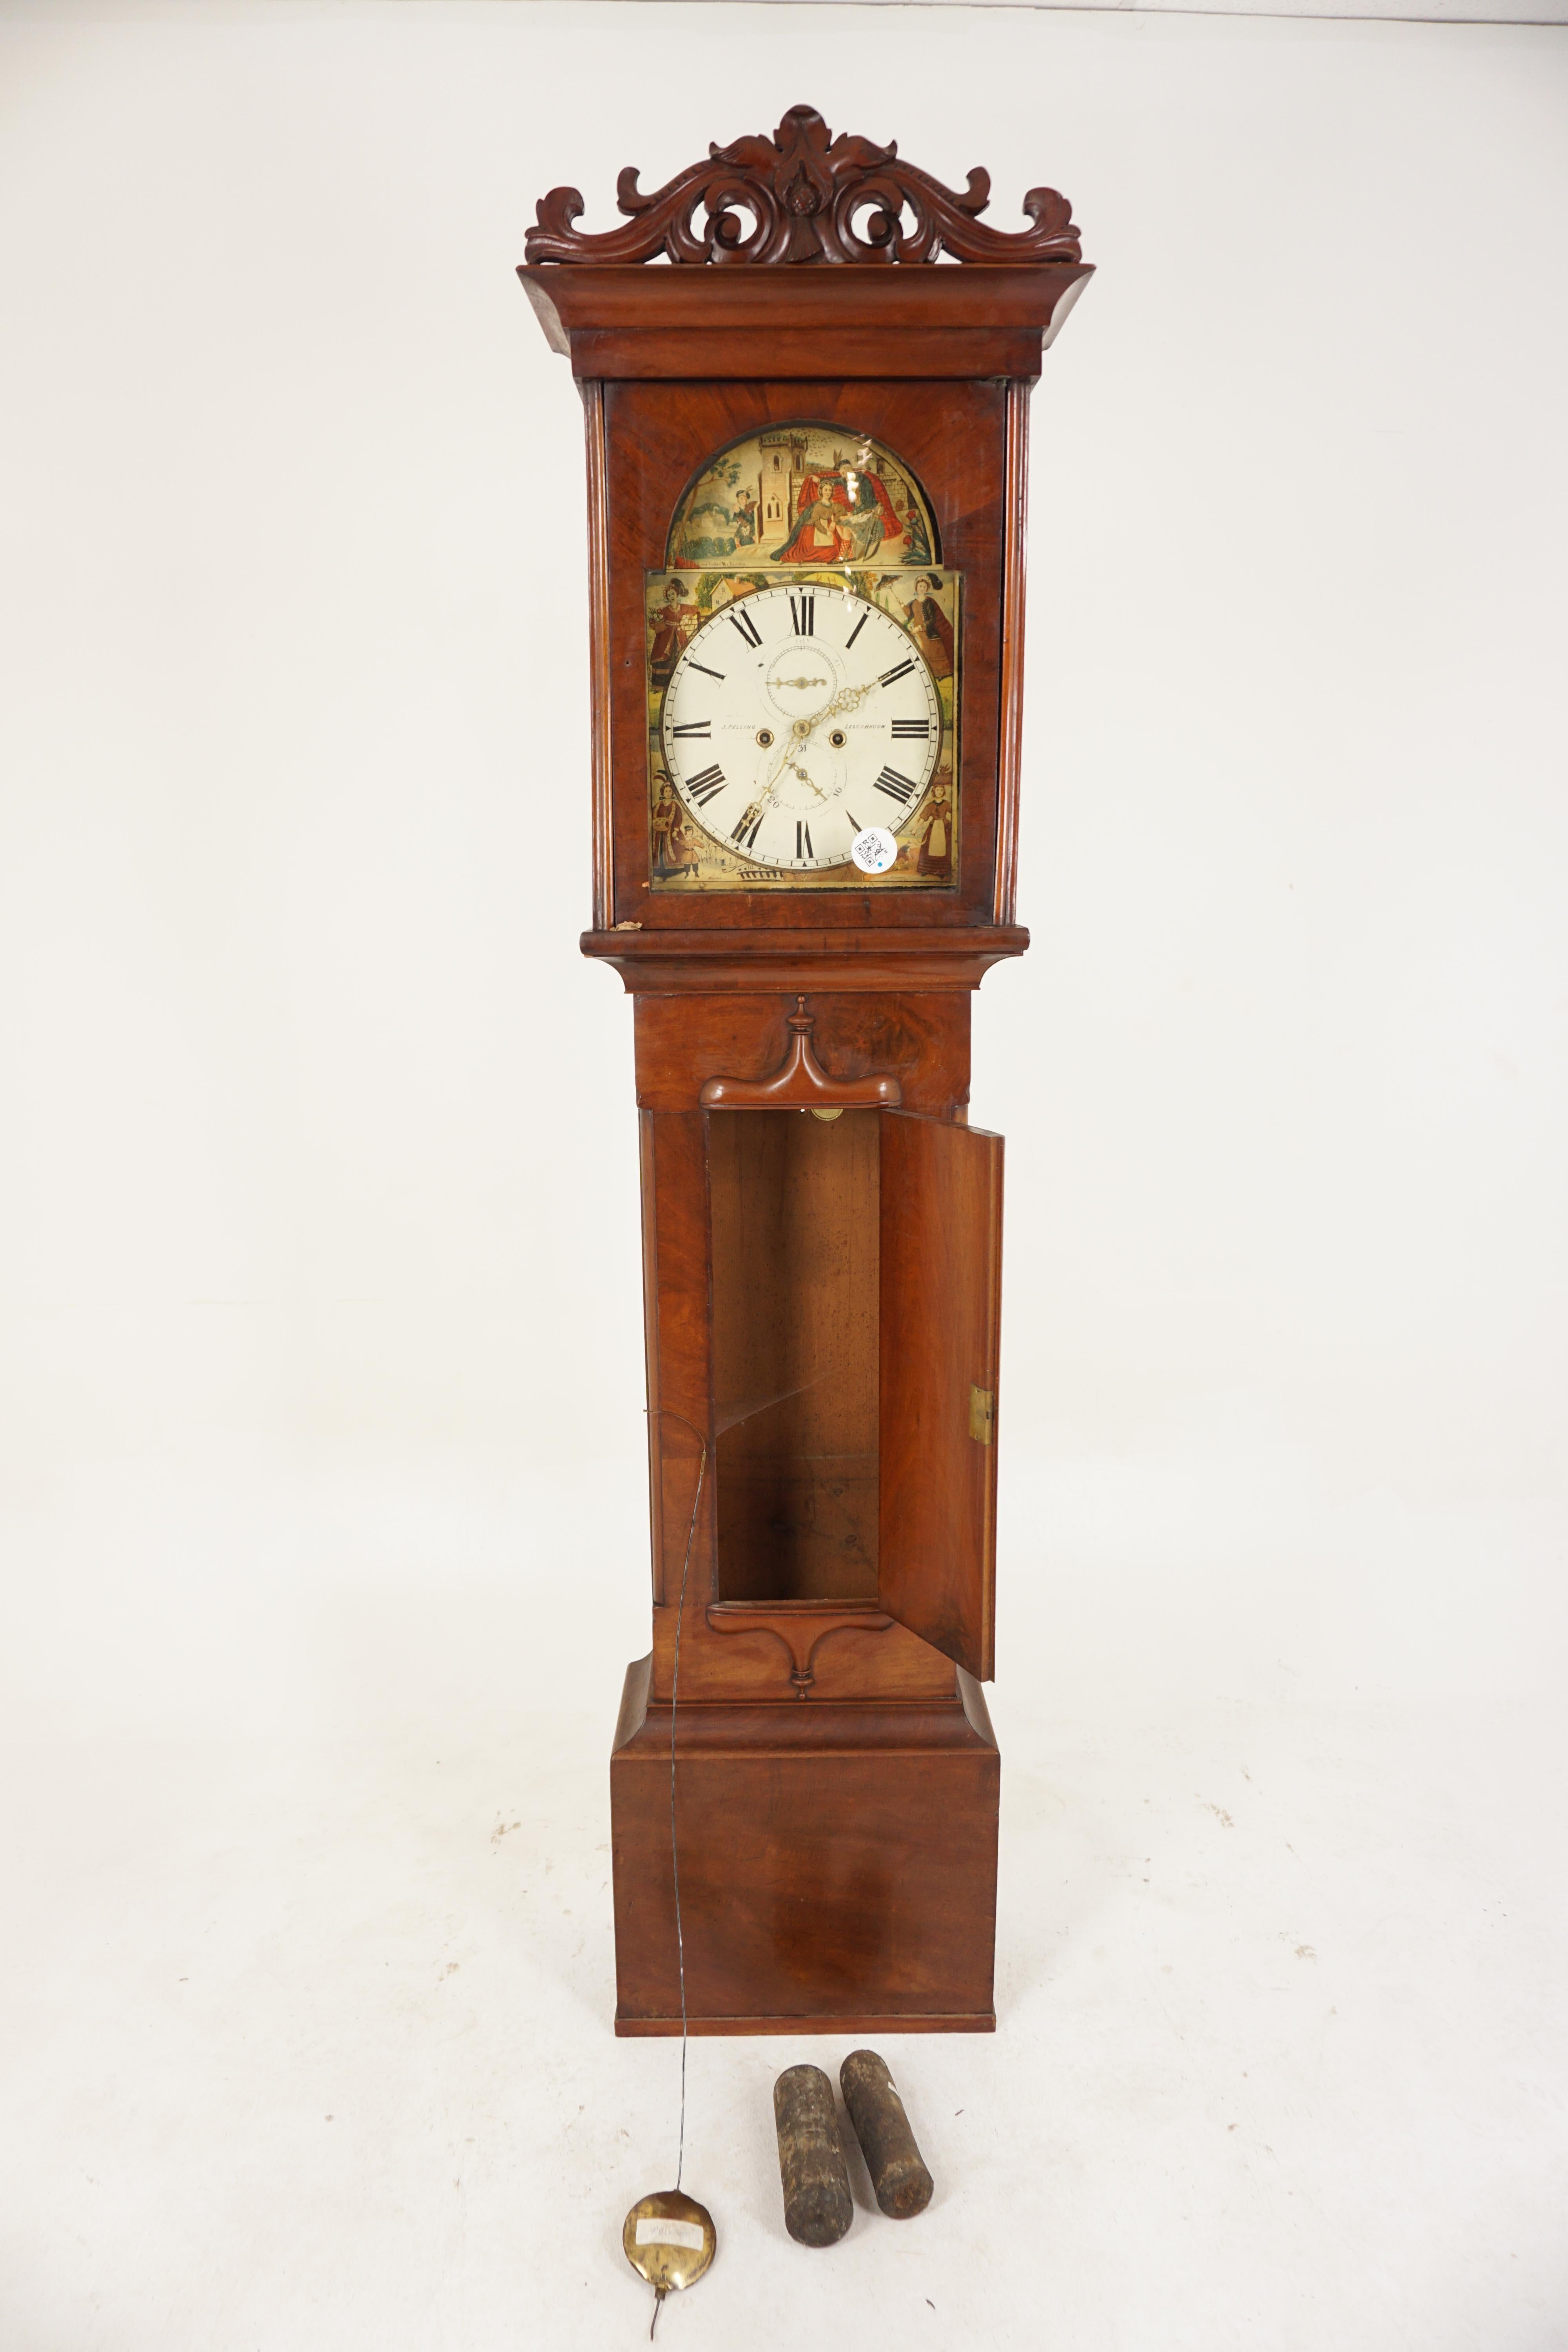 Vic. Grandfather Long Case Clock by Jas Huston of Johnstone, Scotland 1870 H182 4